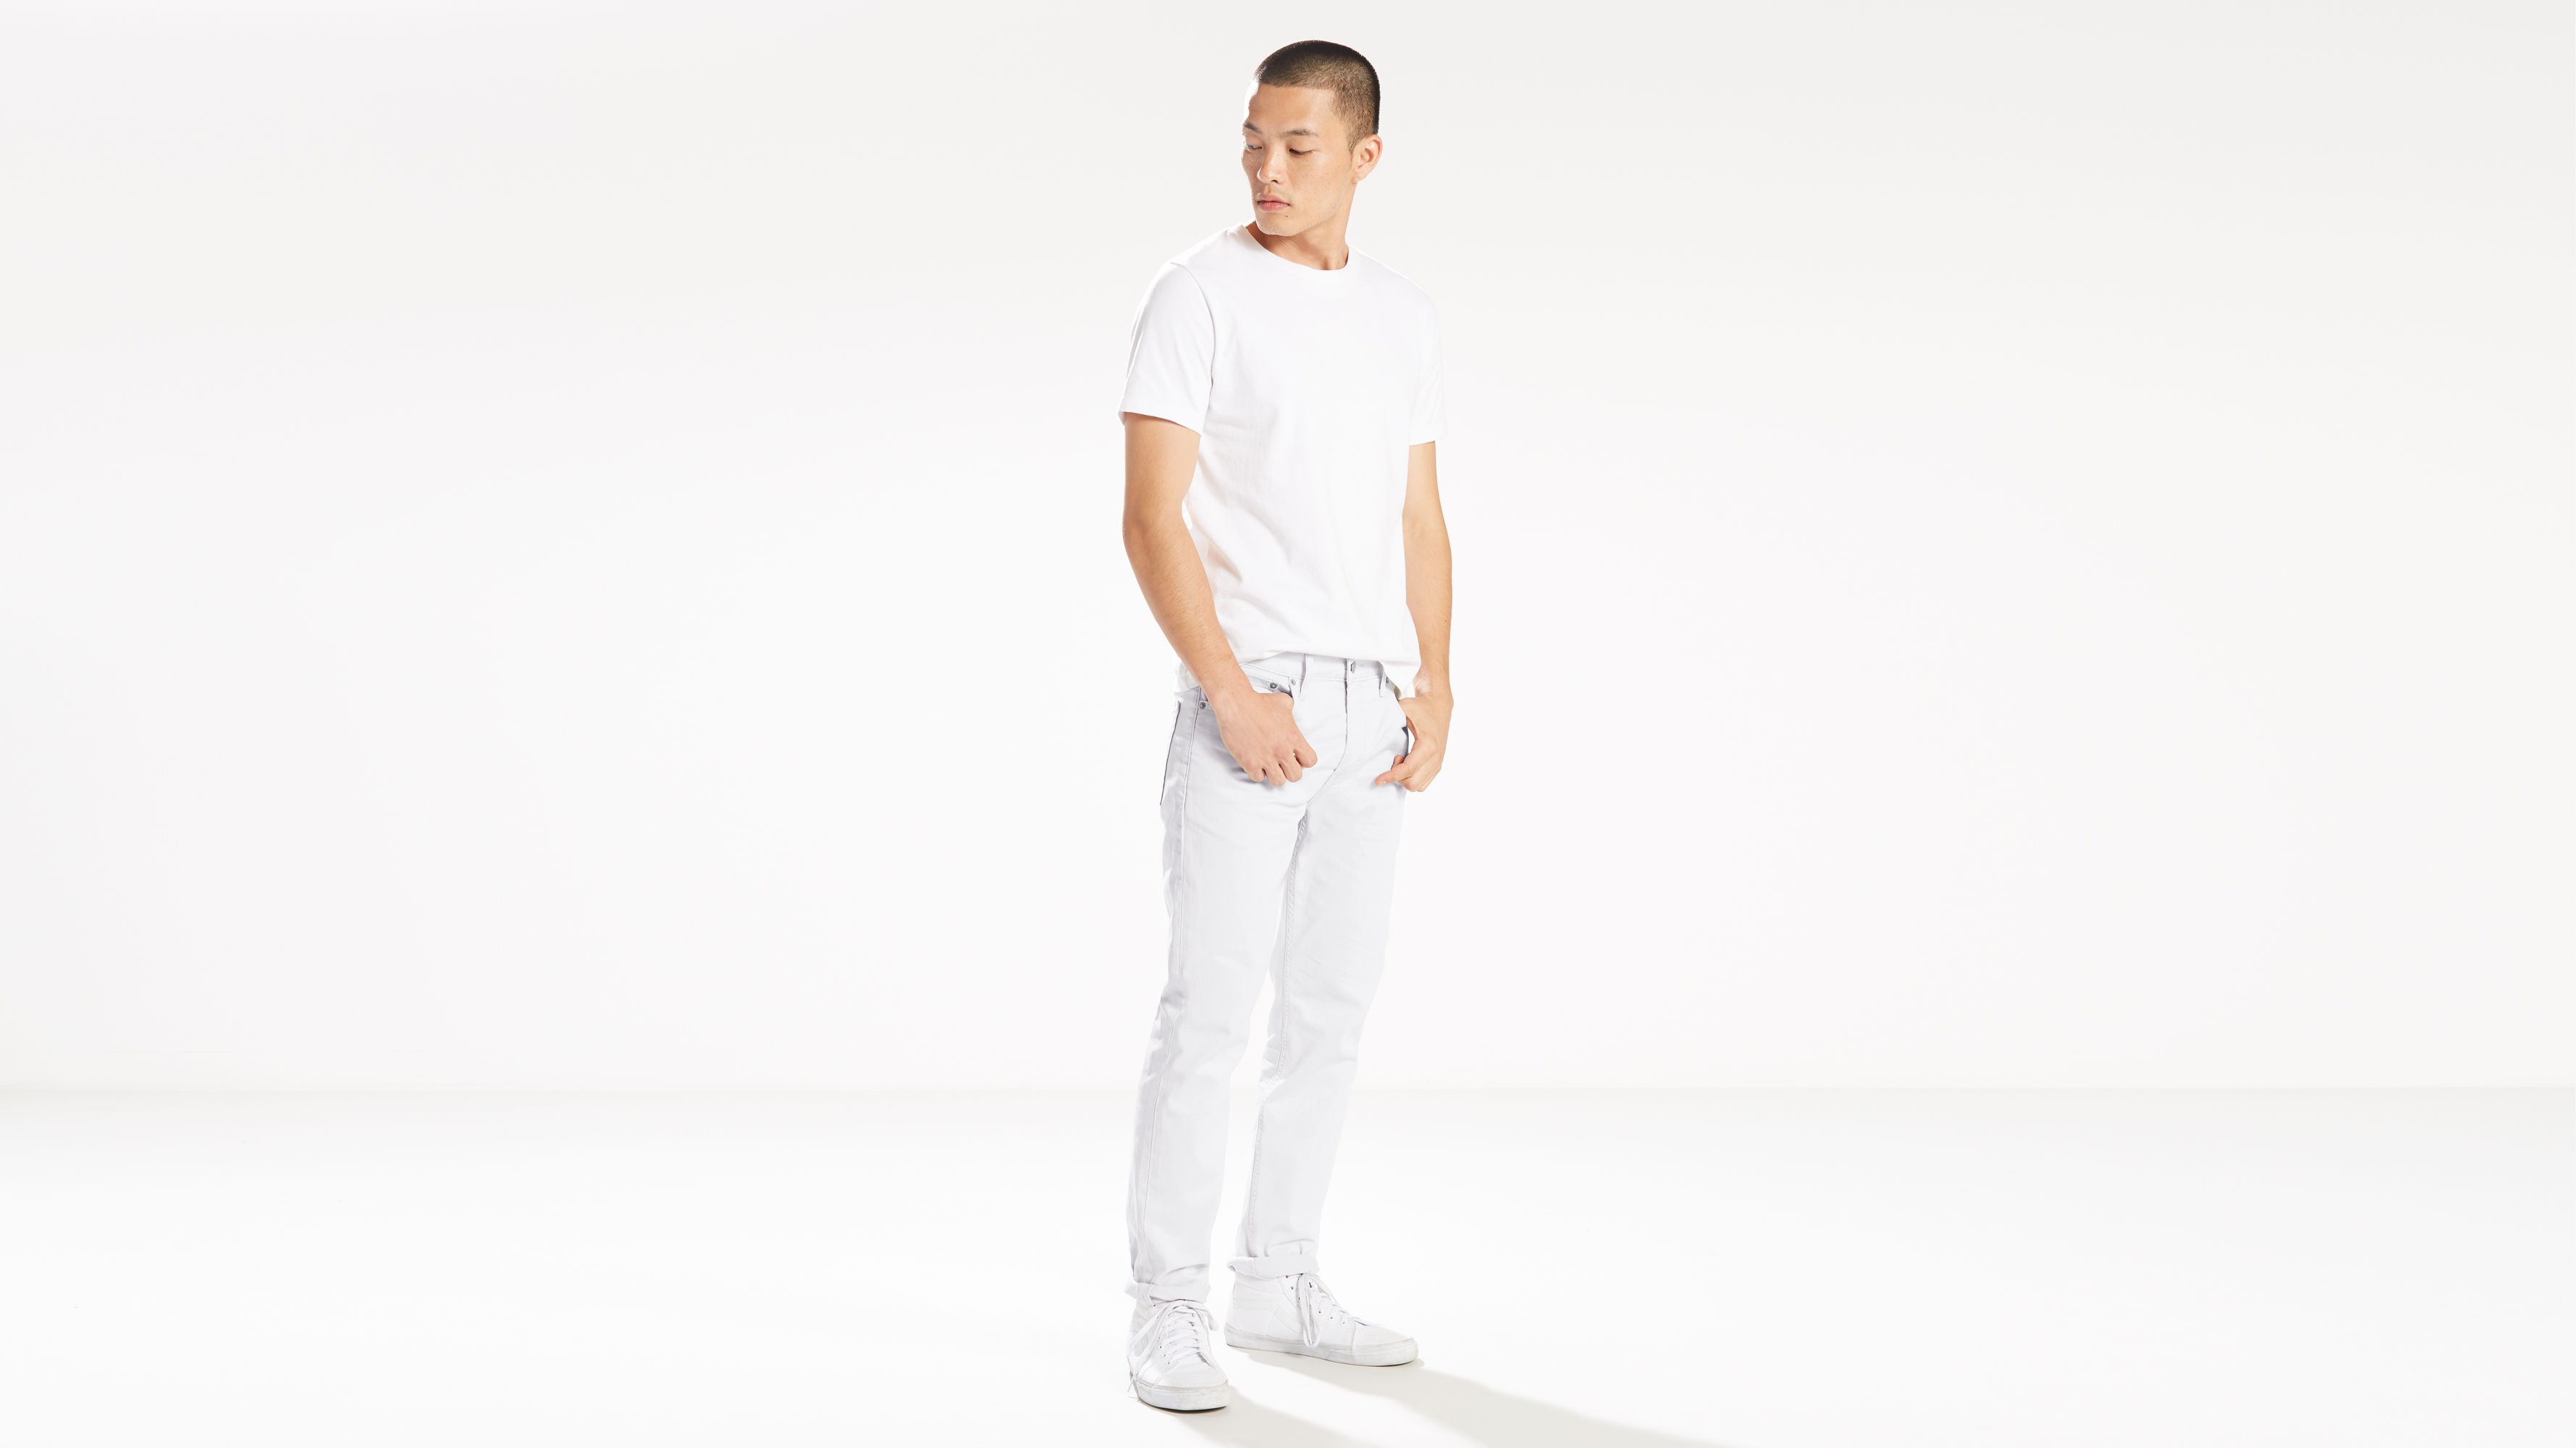 white levis for boys